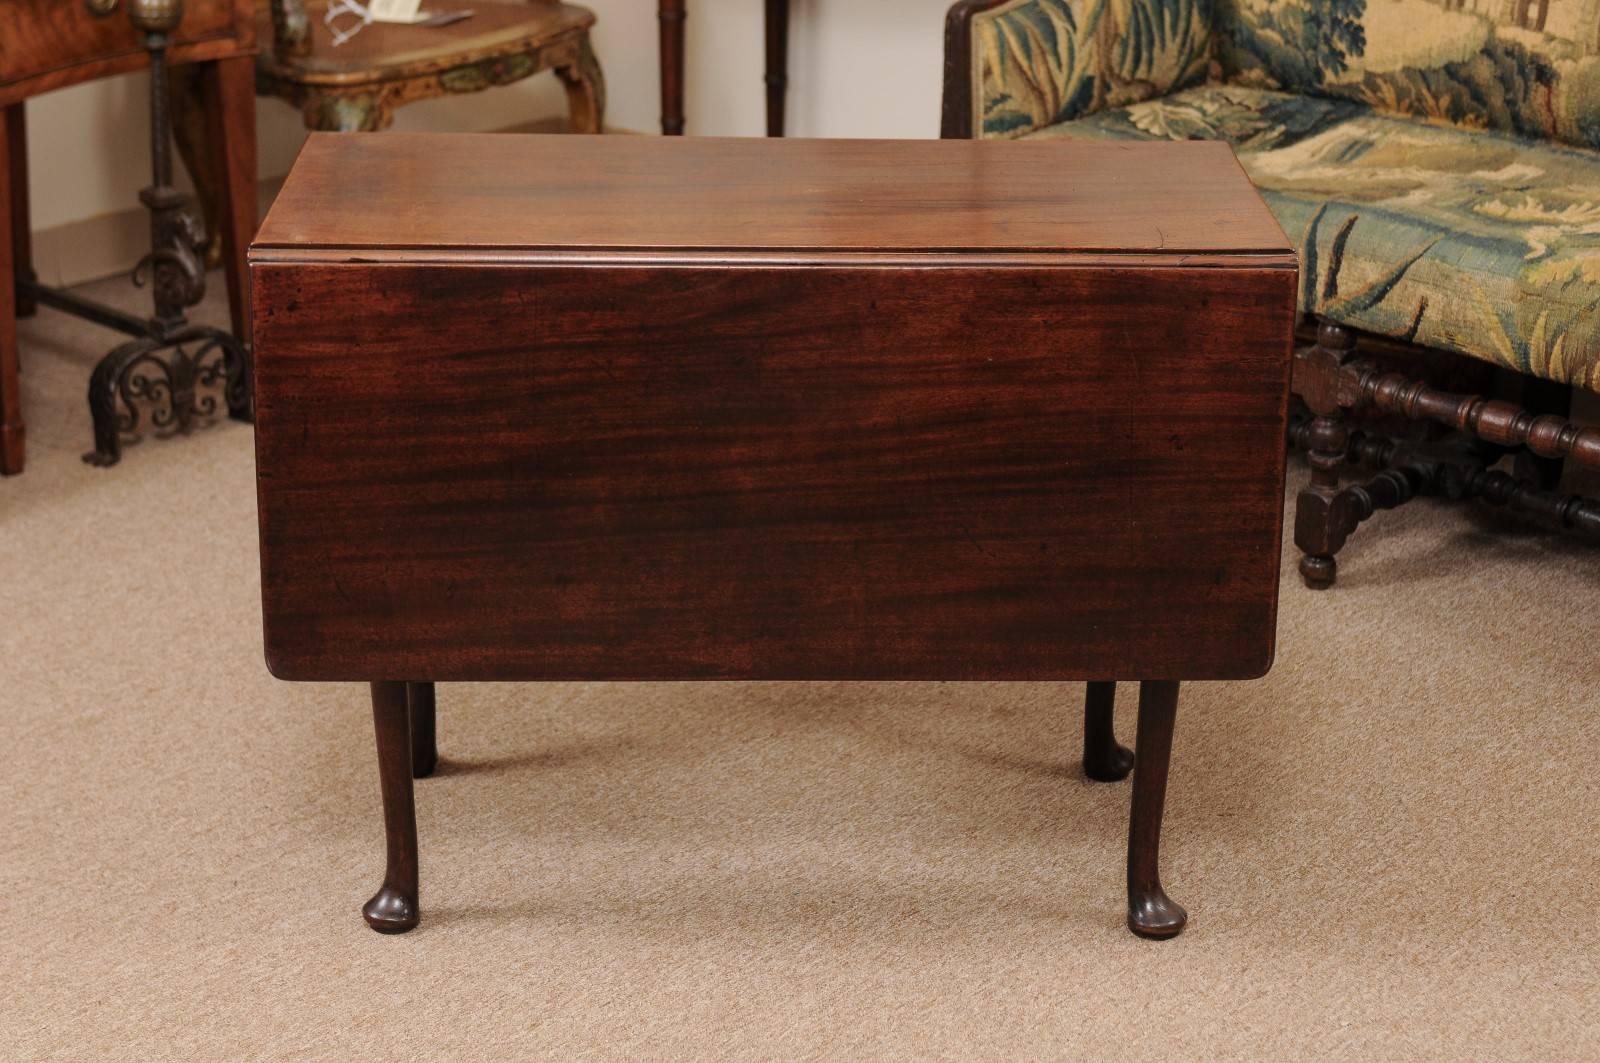 18th Century Mahogany Drop Leaf Table with Pad Feet, England For Sale 3